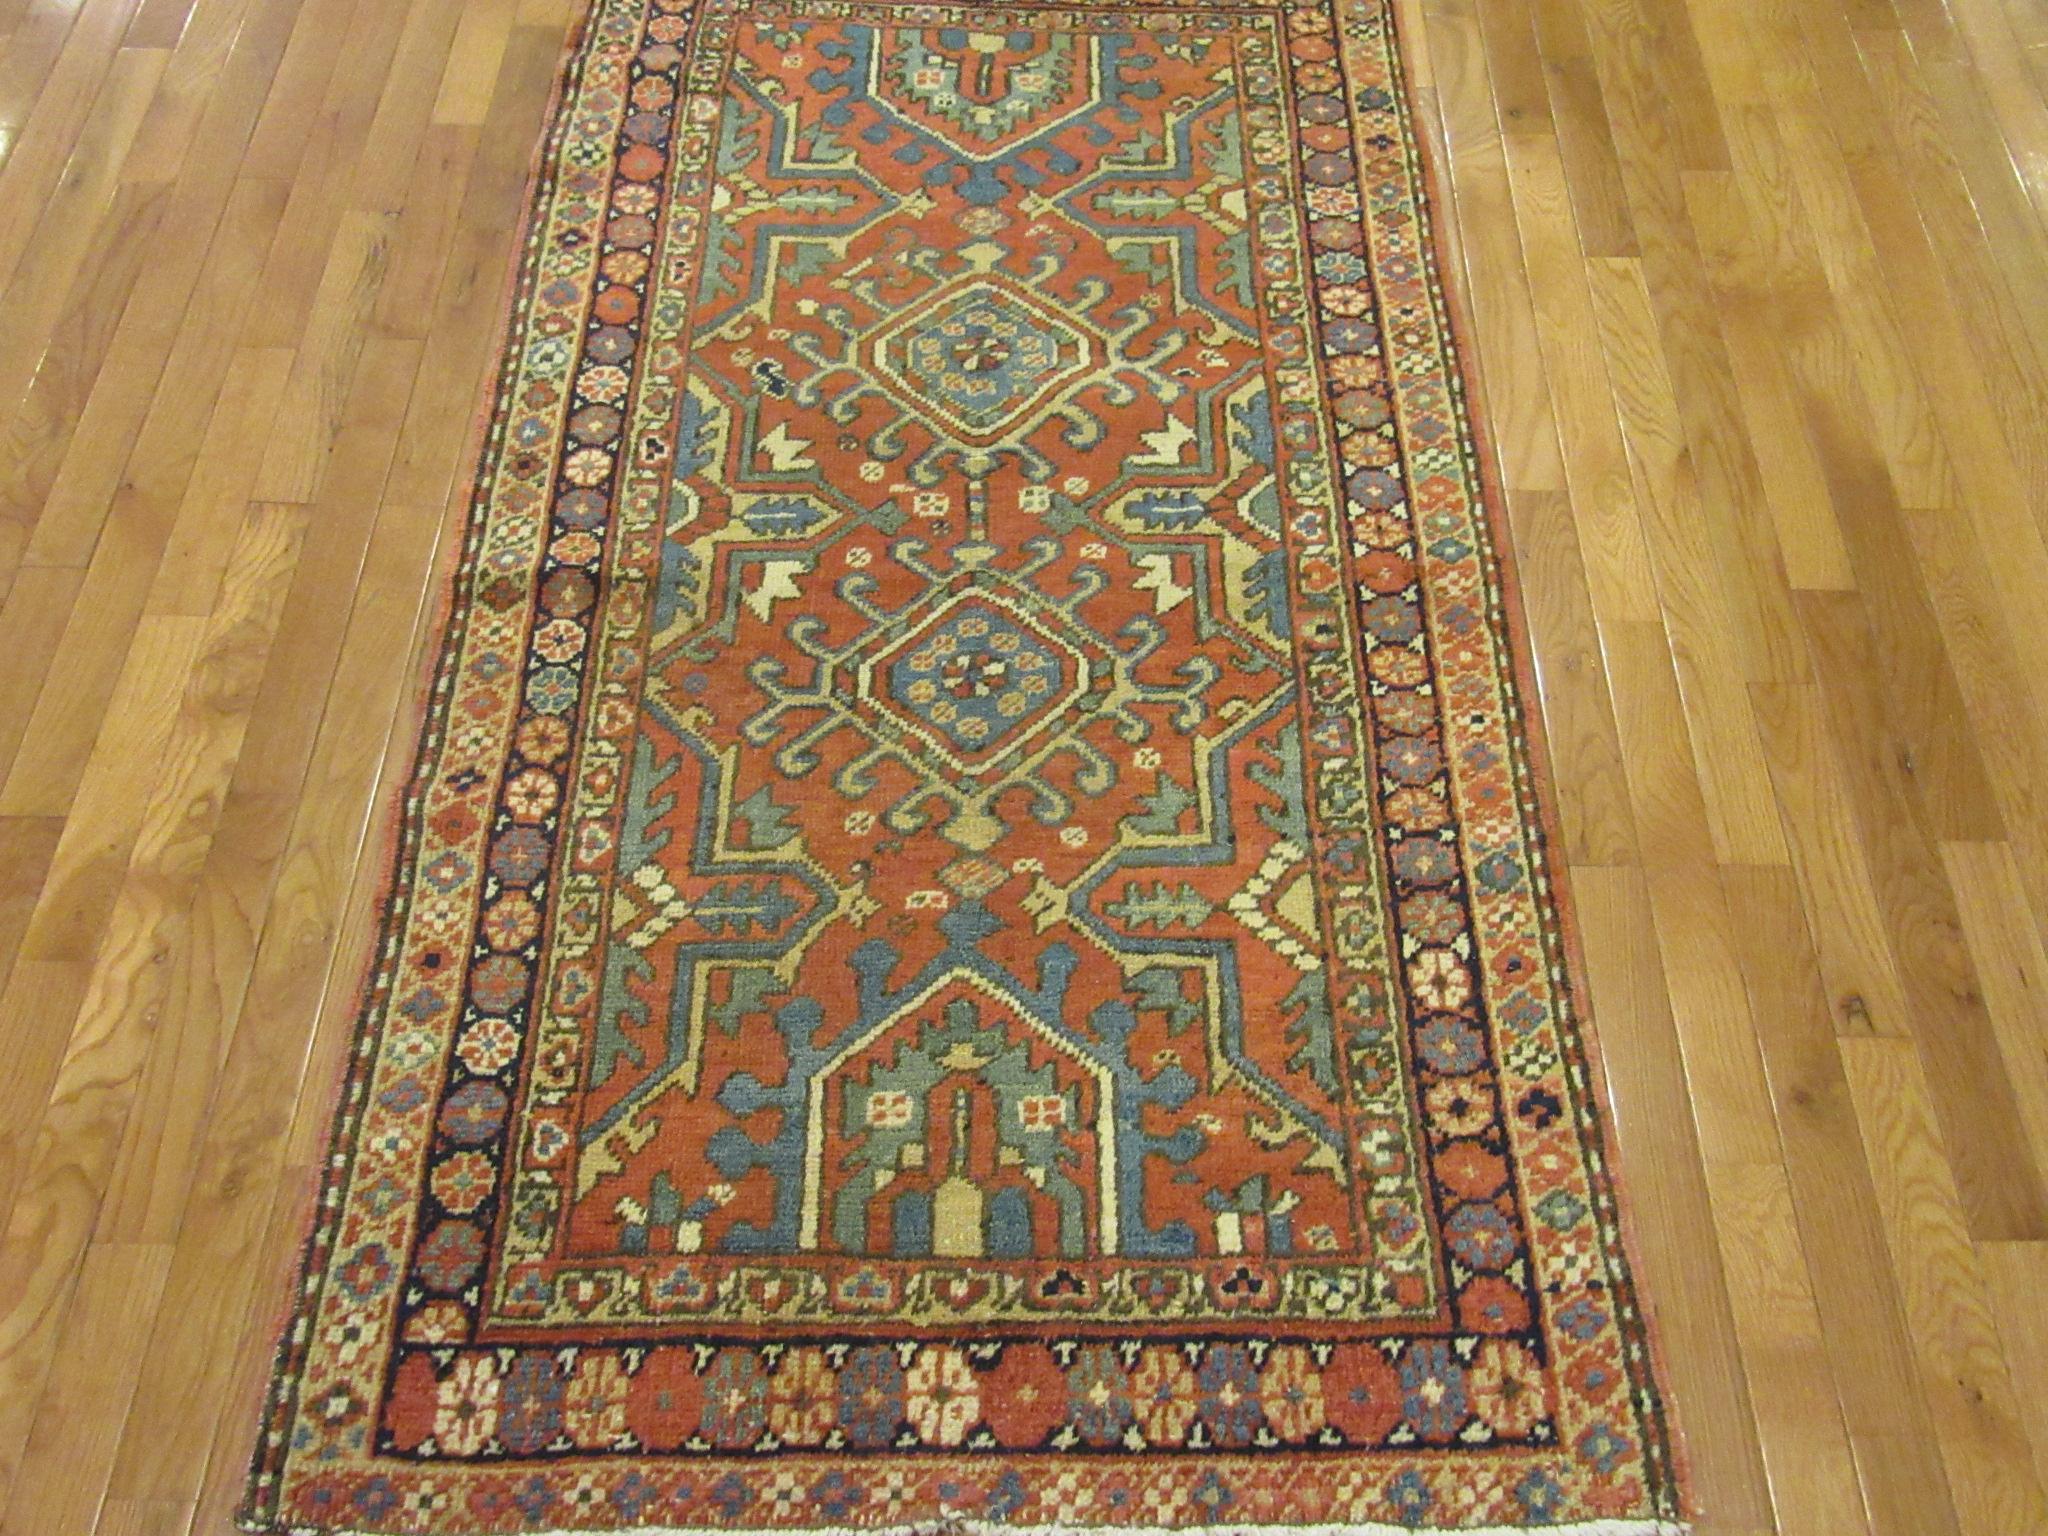 This is a small hand-knotted antique Persian Heriz rug. It is made with wool pile and cotton foundation and natural dyes in an all-over geometric design. It a perfect rug for any spot in your house or office. The rug measures
3' x 5' 6'' and in